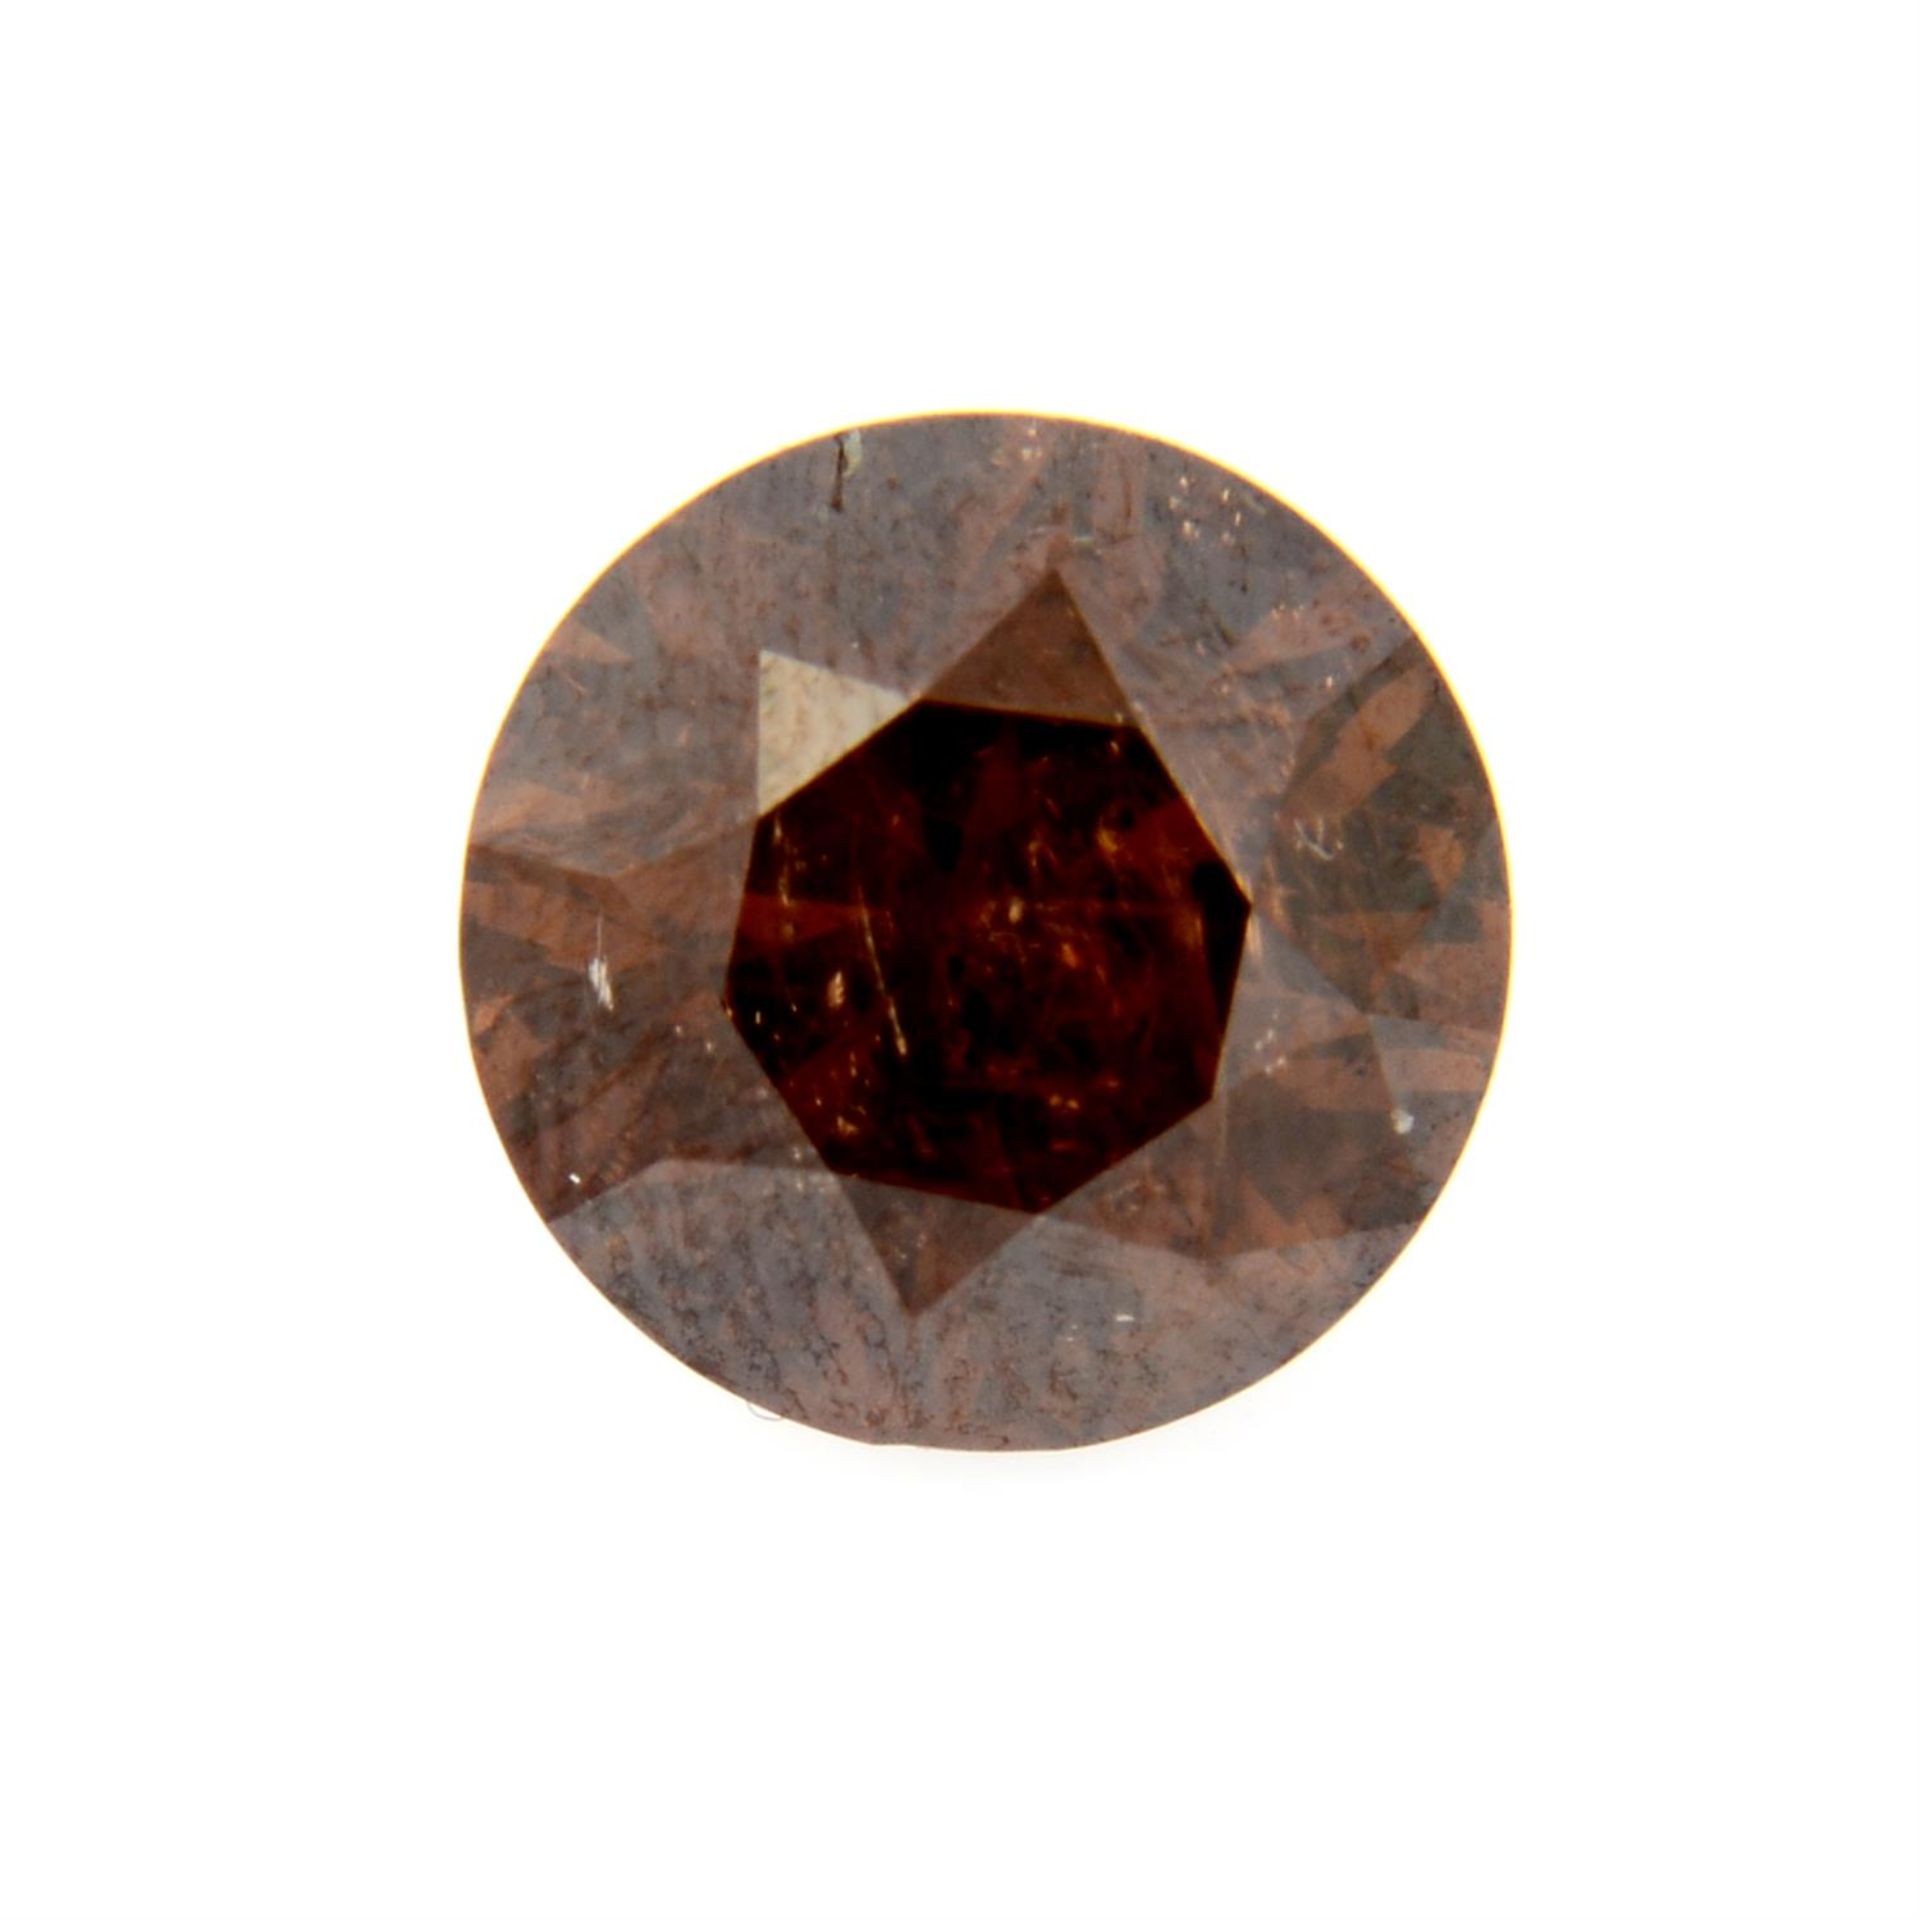 A brilliant cut 'brown' diamond, weighing 3.01ct. Estimated to be 'brown' colour and I2 clarity